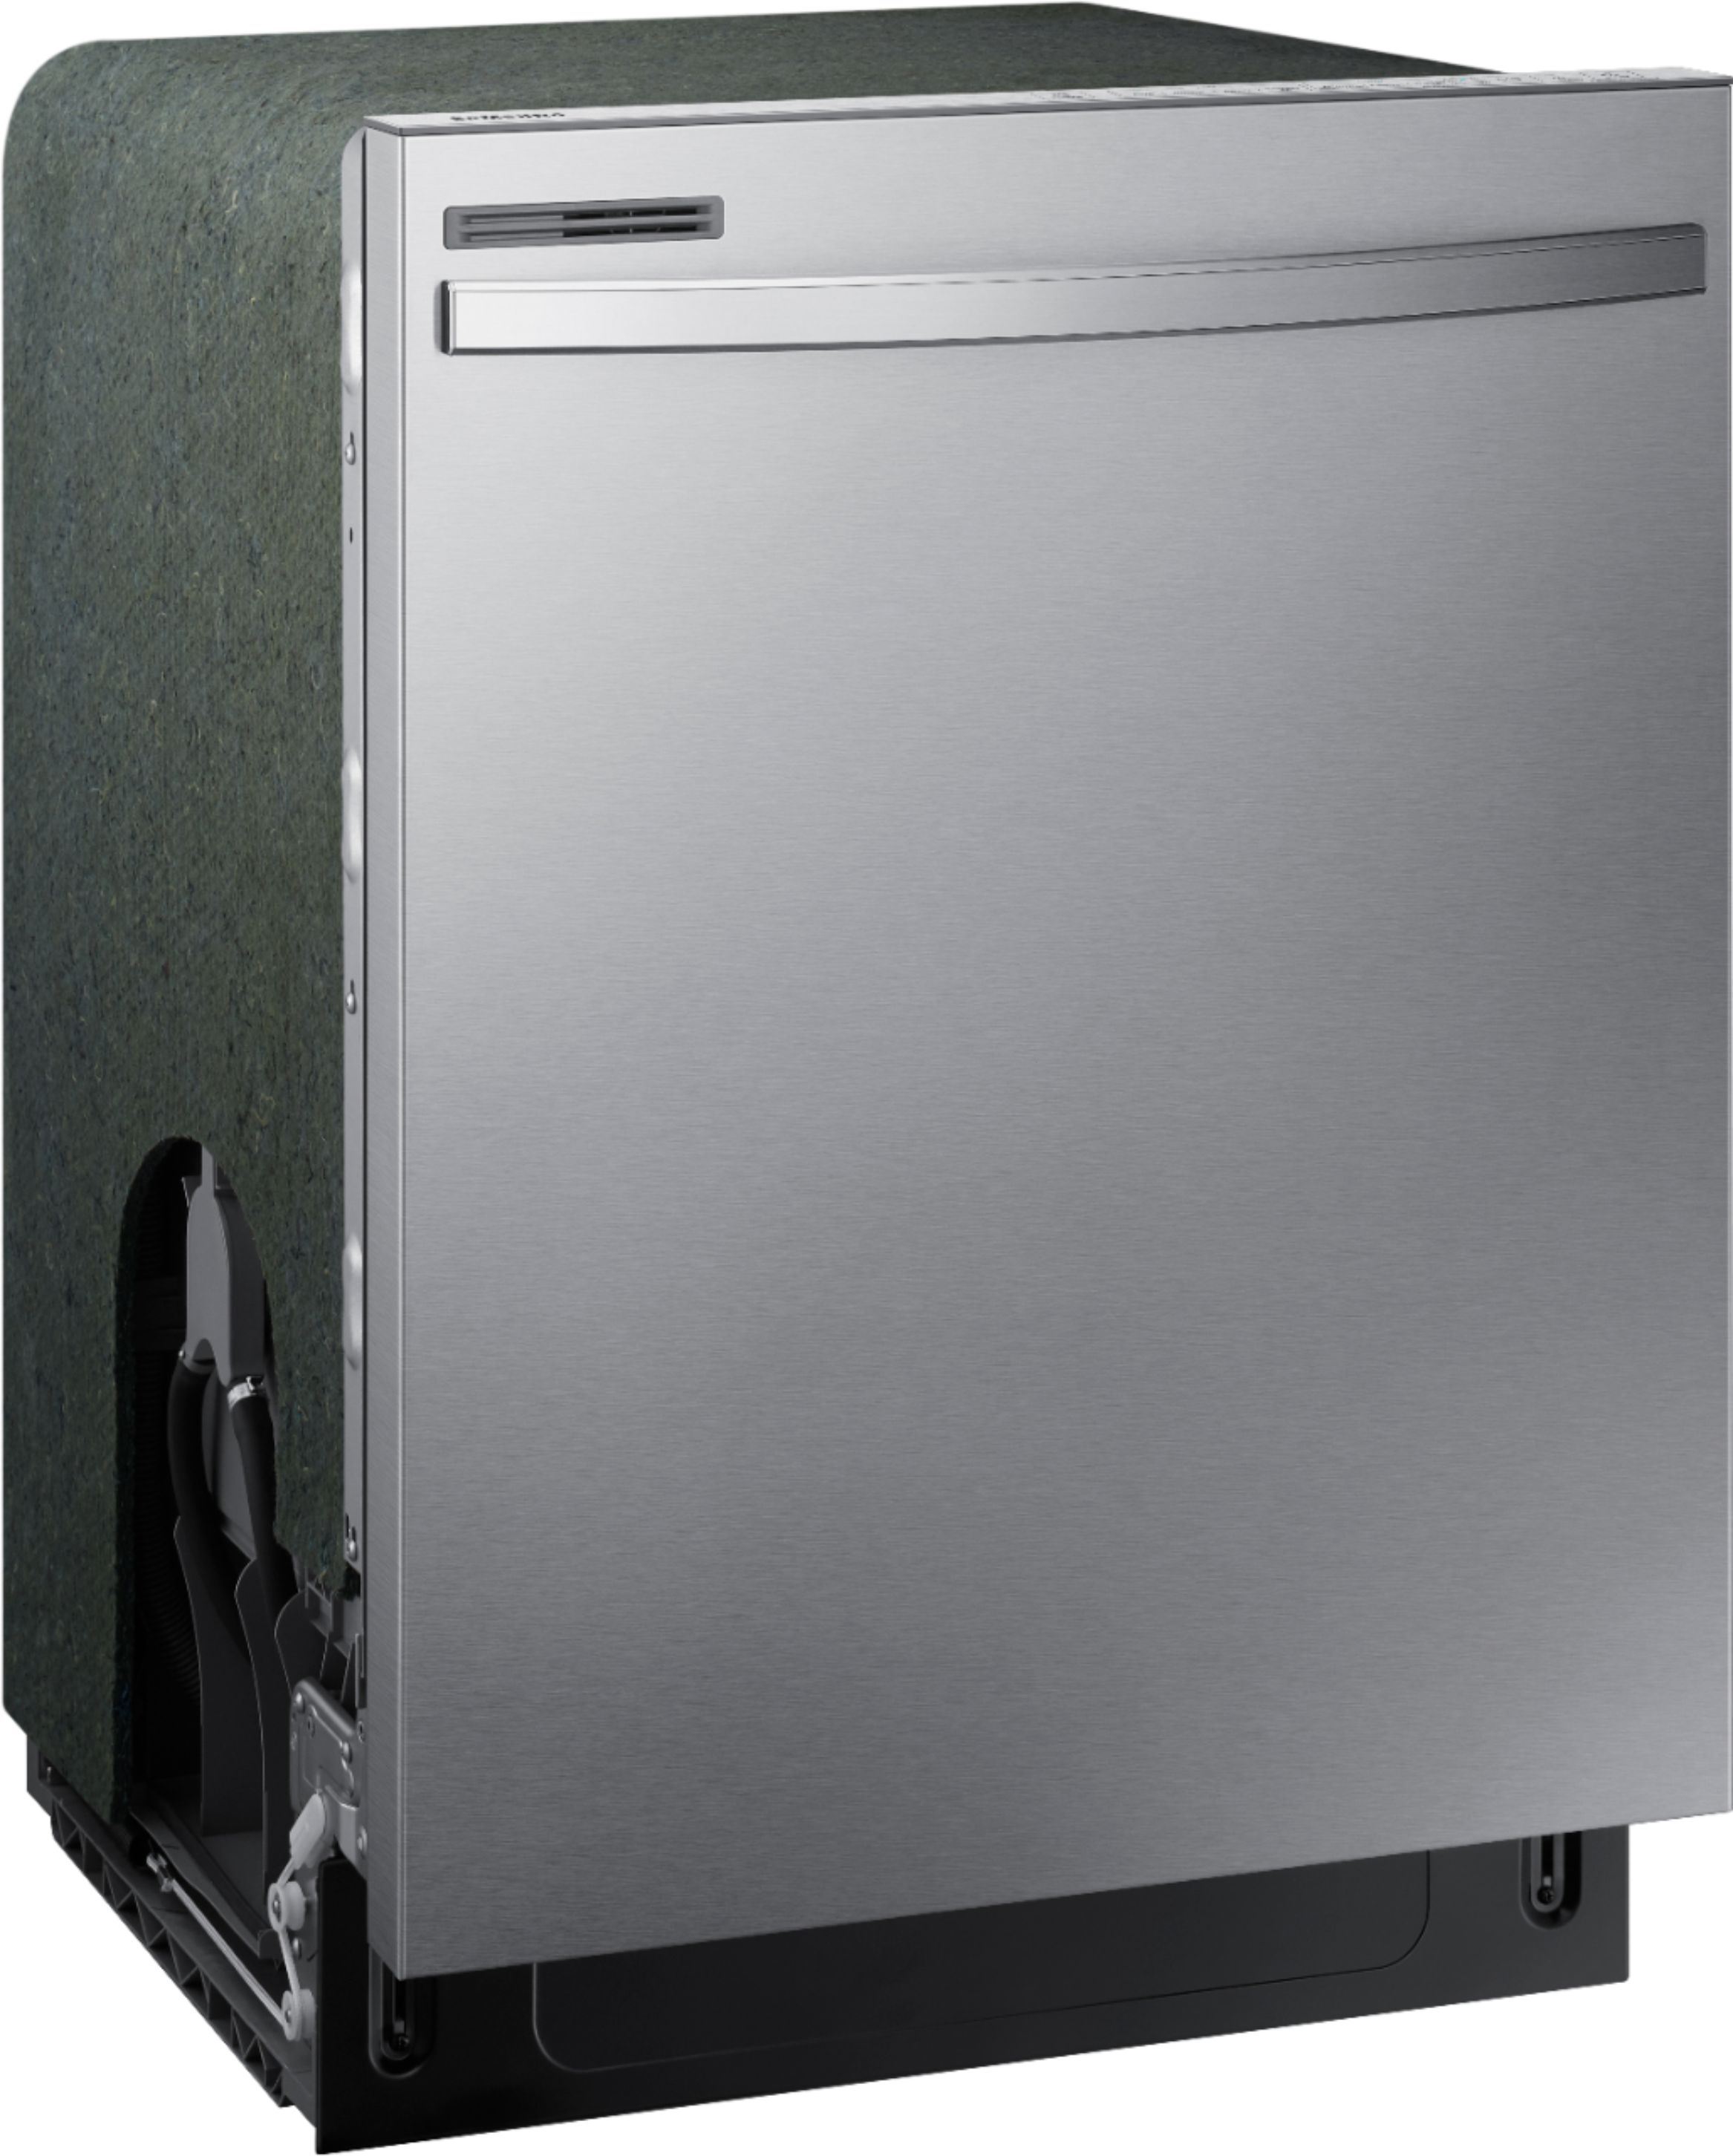 Angle View: Café - 24" Top Control Tall Tub Built-In Dishwasher with Stainless Steel Tub - Stainless steel